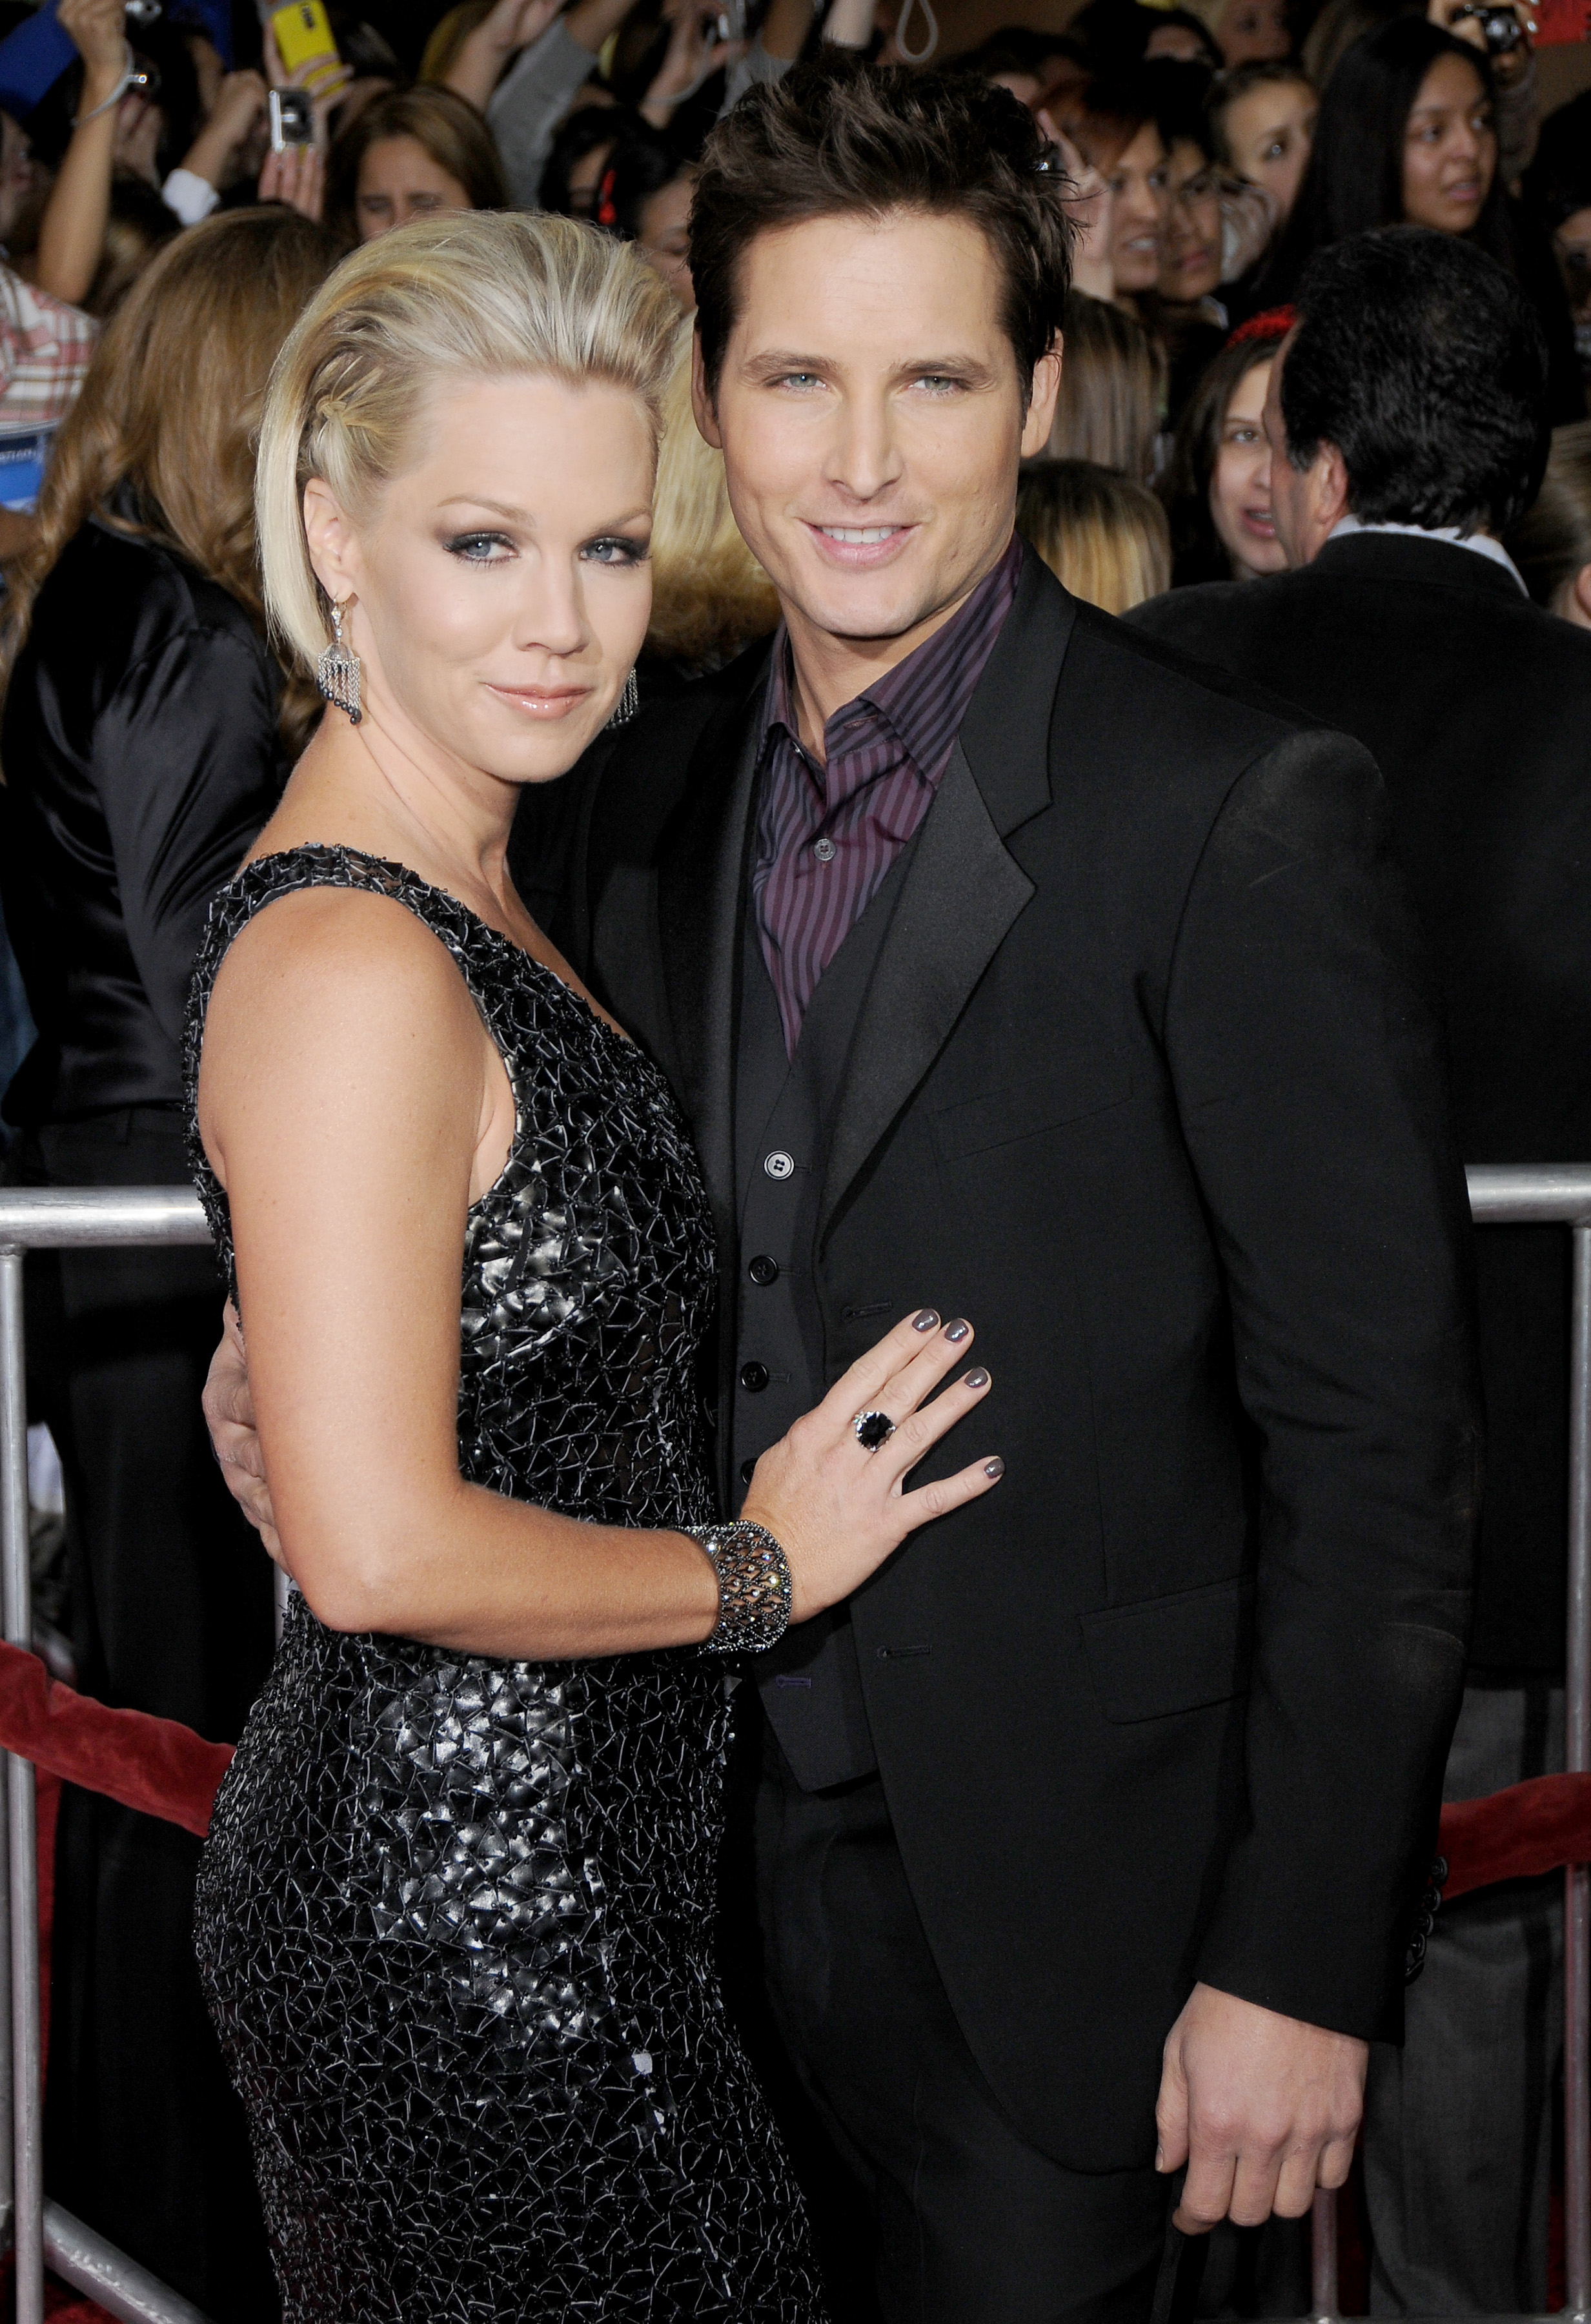 Jennie Garth and Peter Facinelli pose together on the red carpet, with Jennie in a sequined dress and Peter in a suit